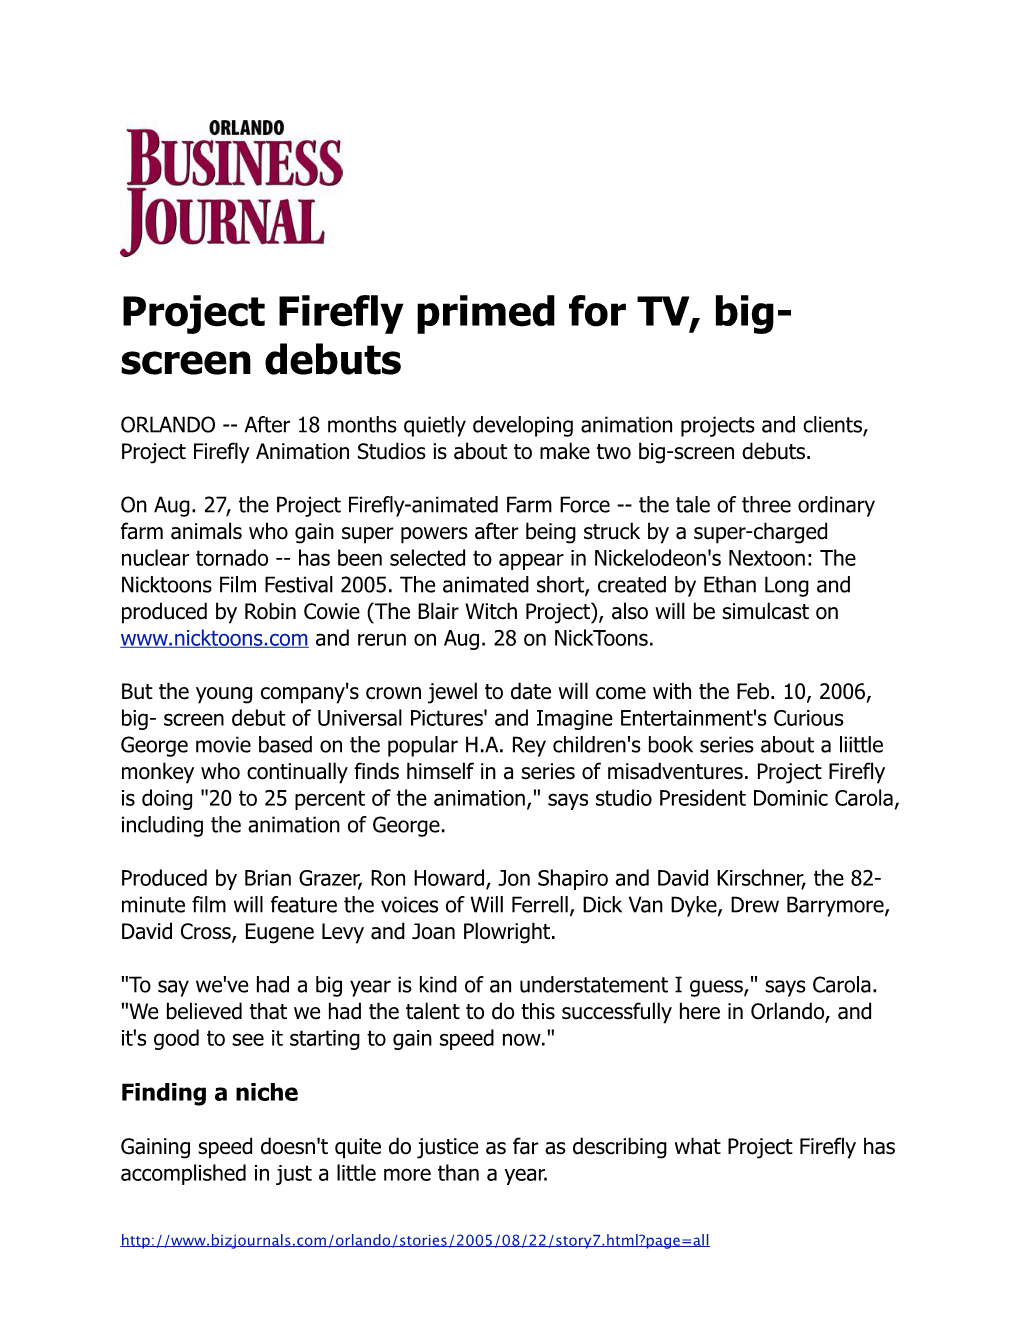 Project Firefly Primed for TV, Big-Screen Debuts